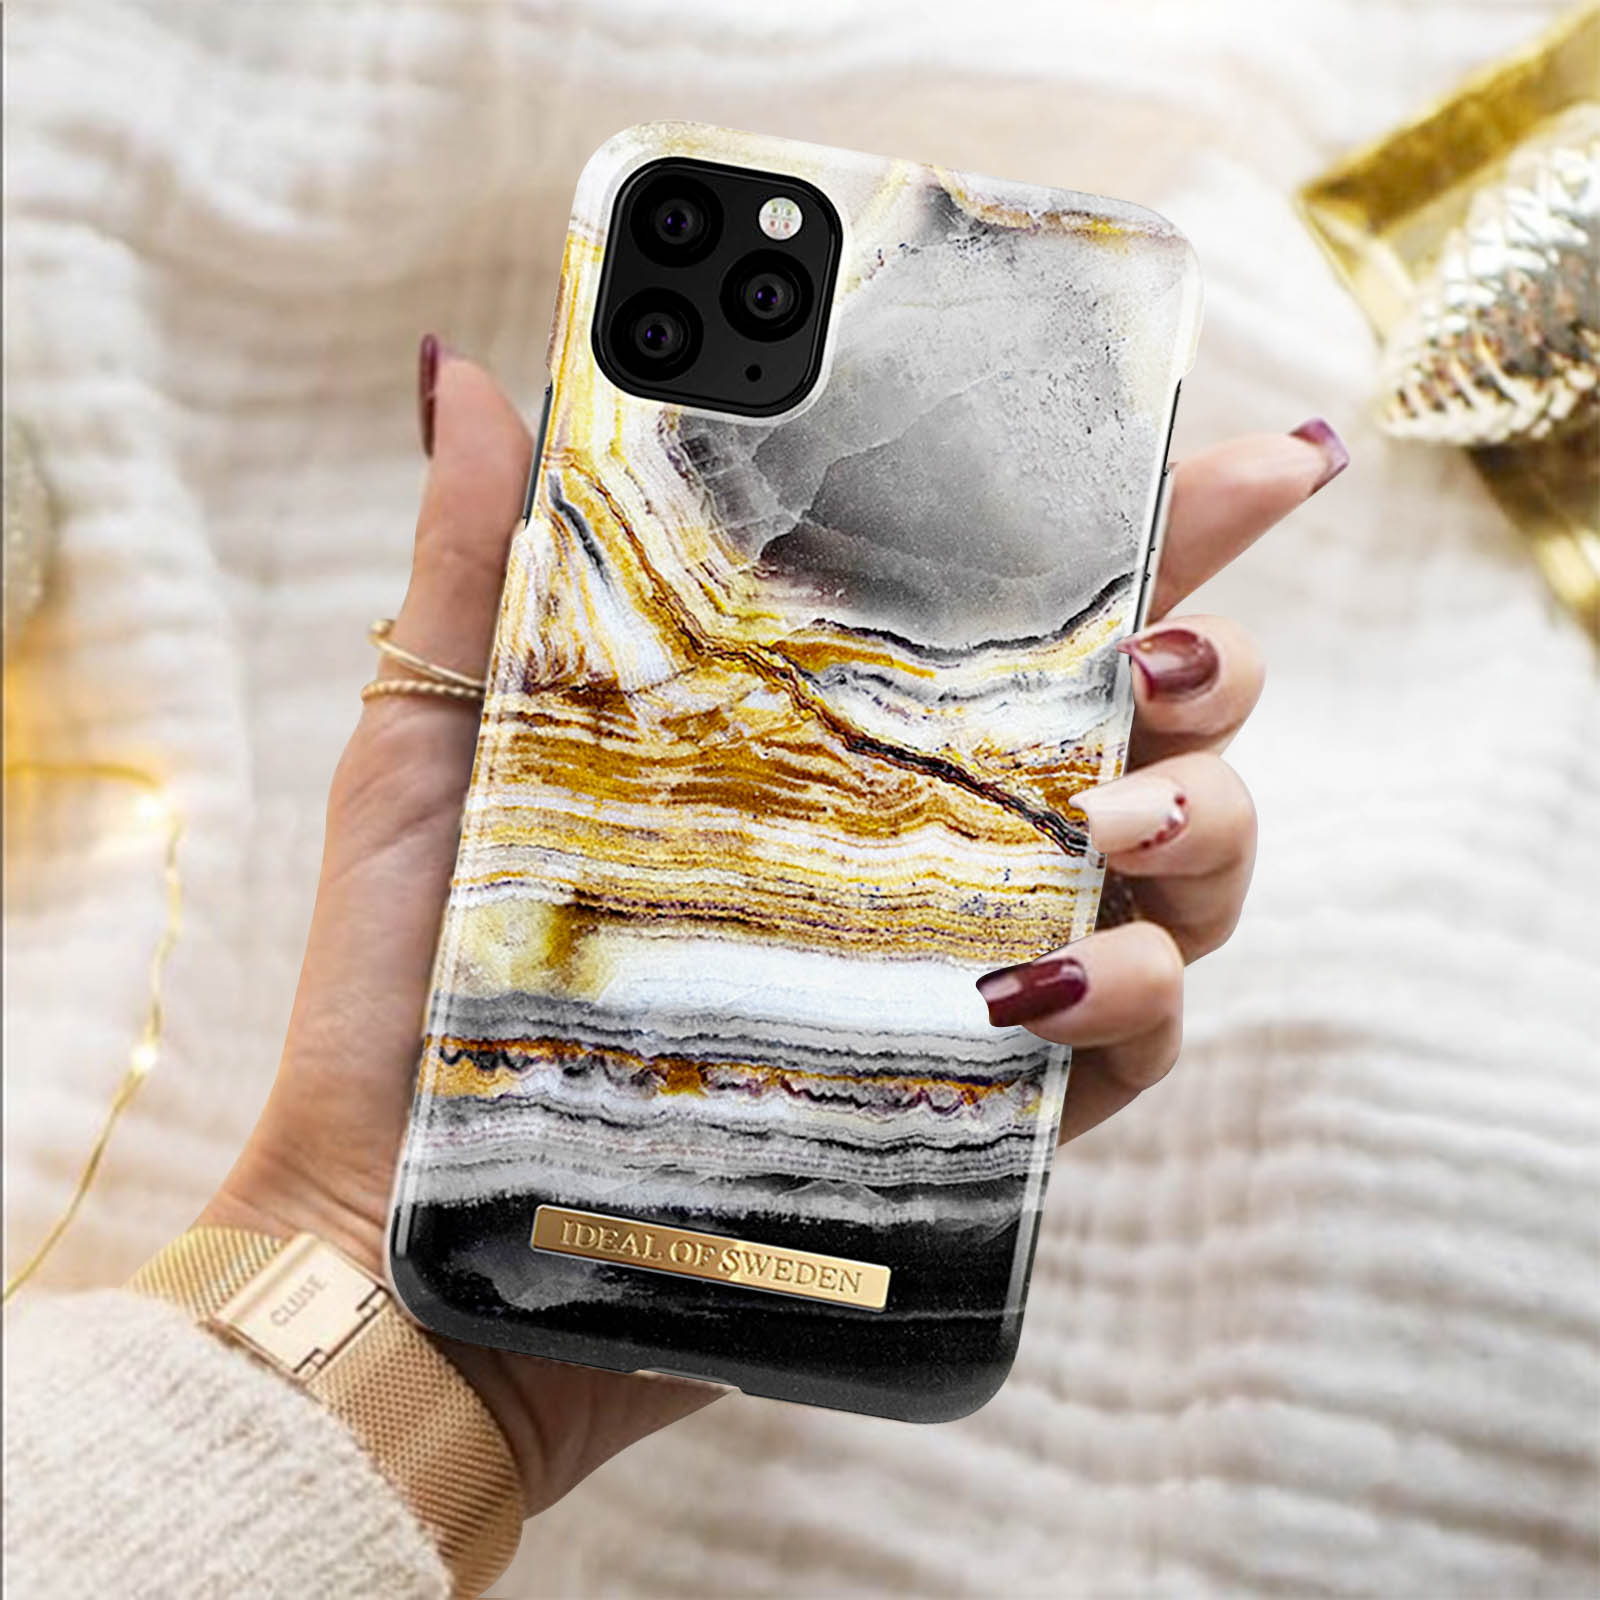 IDEAL OF SWEDEN iPhone Apple, Pro, Backcover, IDFCAW18-I1958-99, XS, iPhone Outer X, Space iPhone 11 Marble